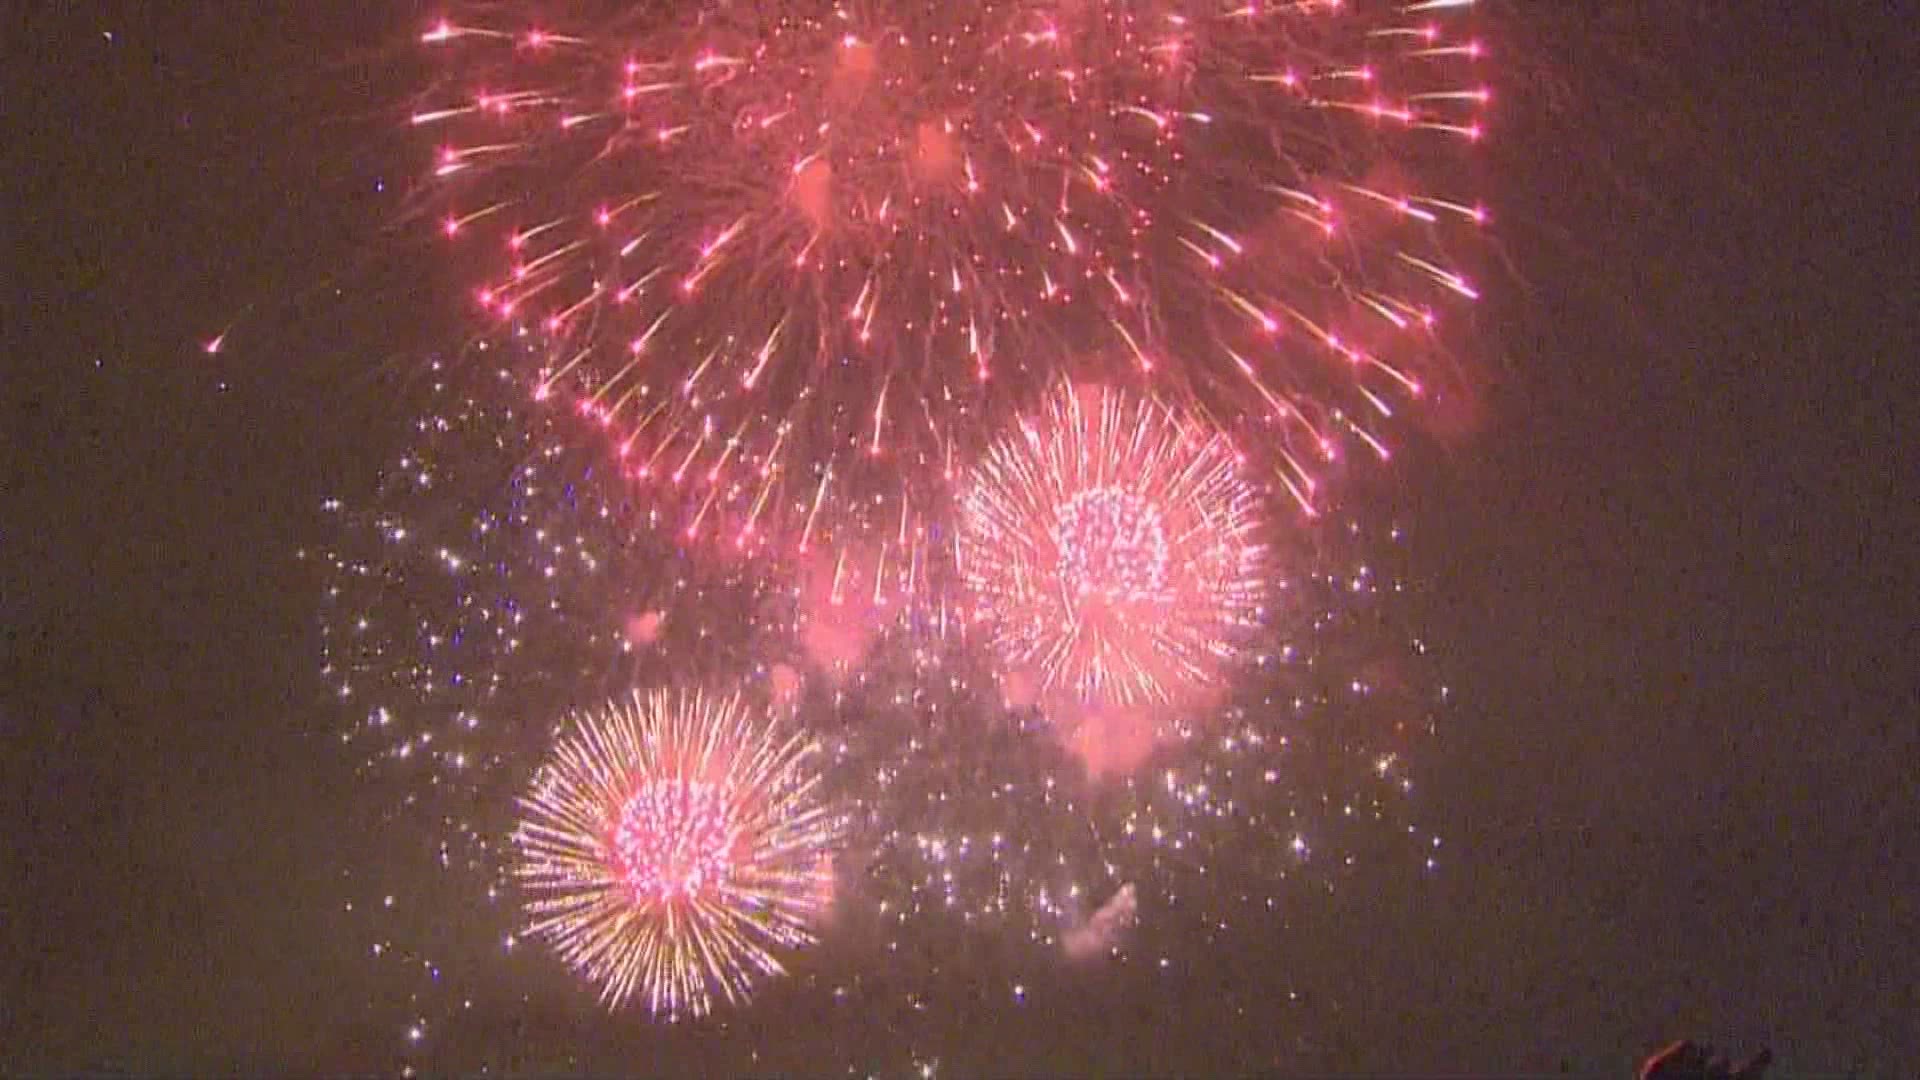 People who shoot off fireworks in Tacoma face fines of $250 or more.